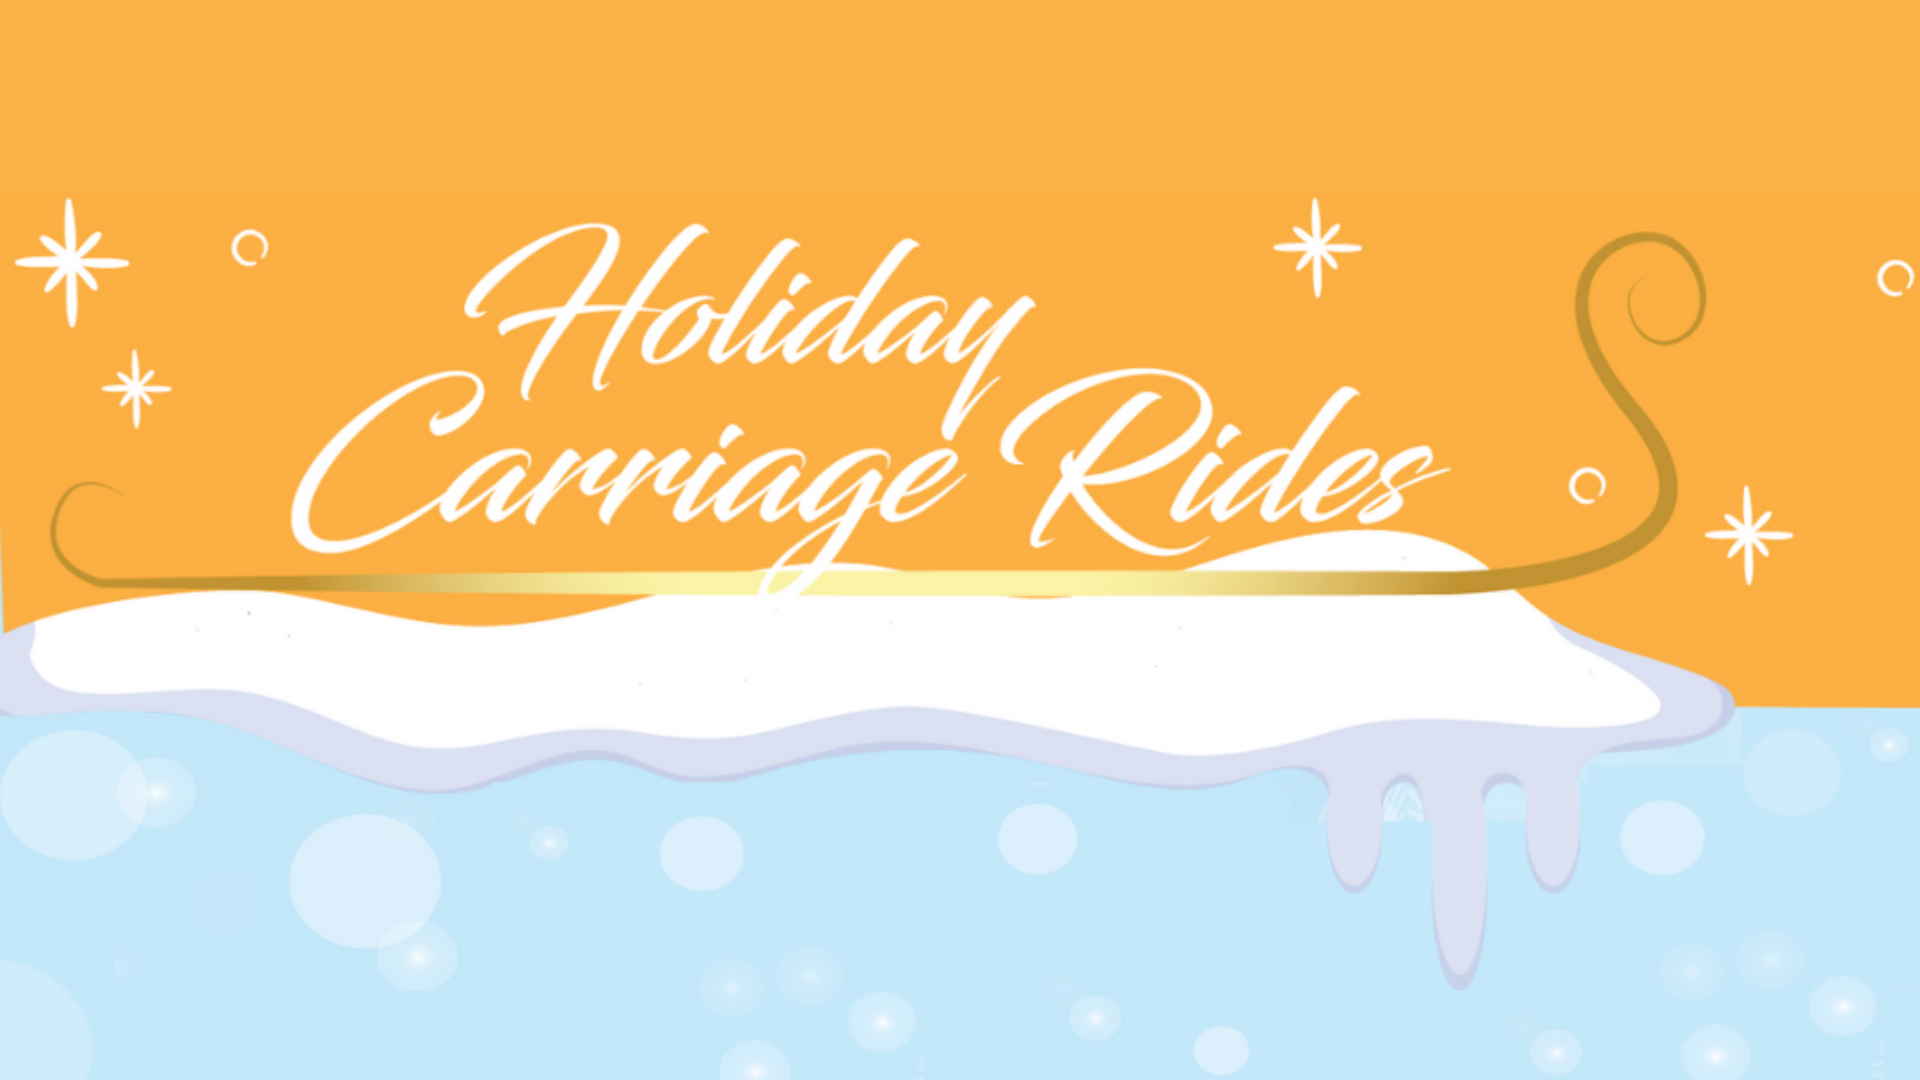 Holiday Carriage Rides event image